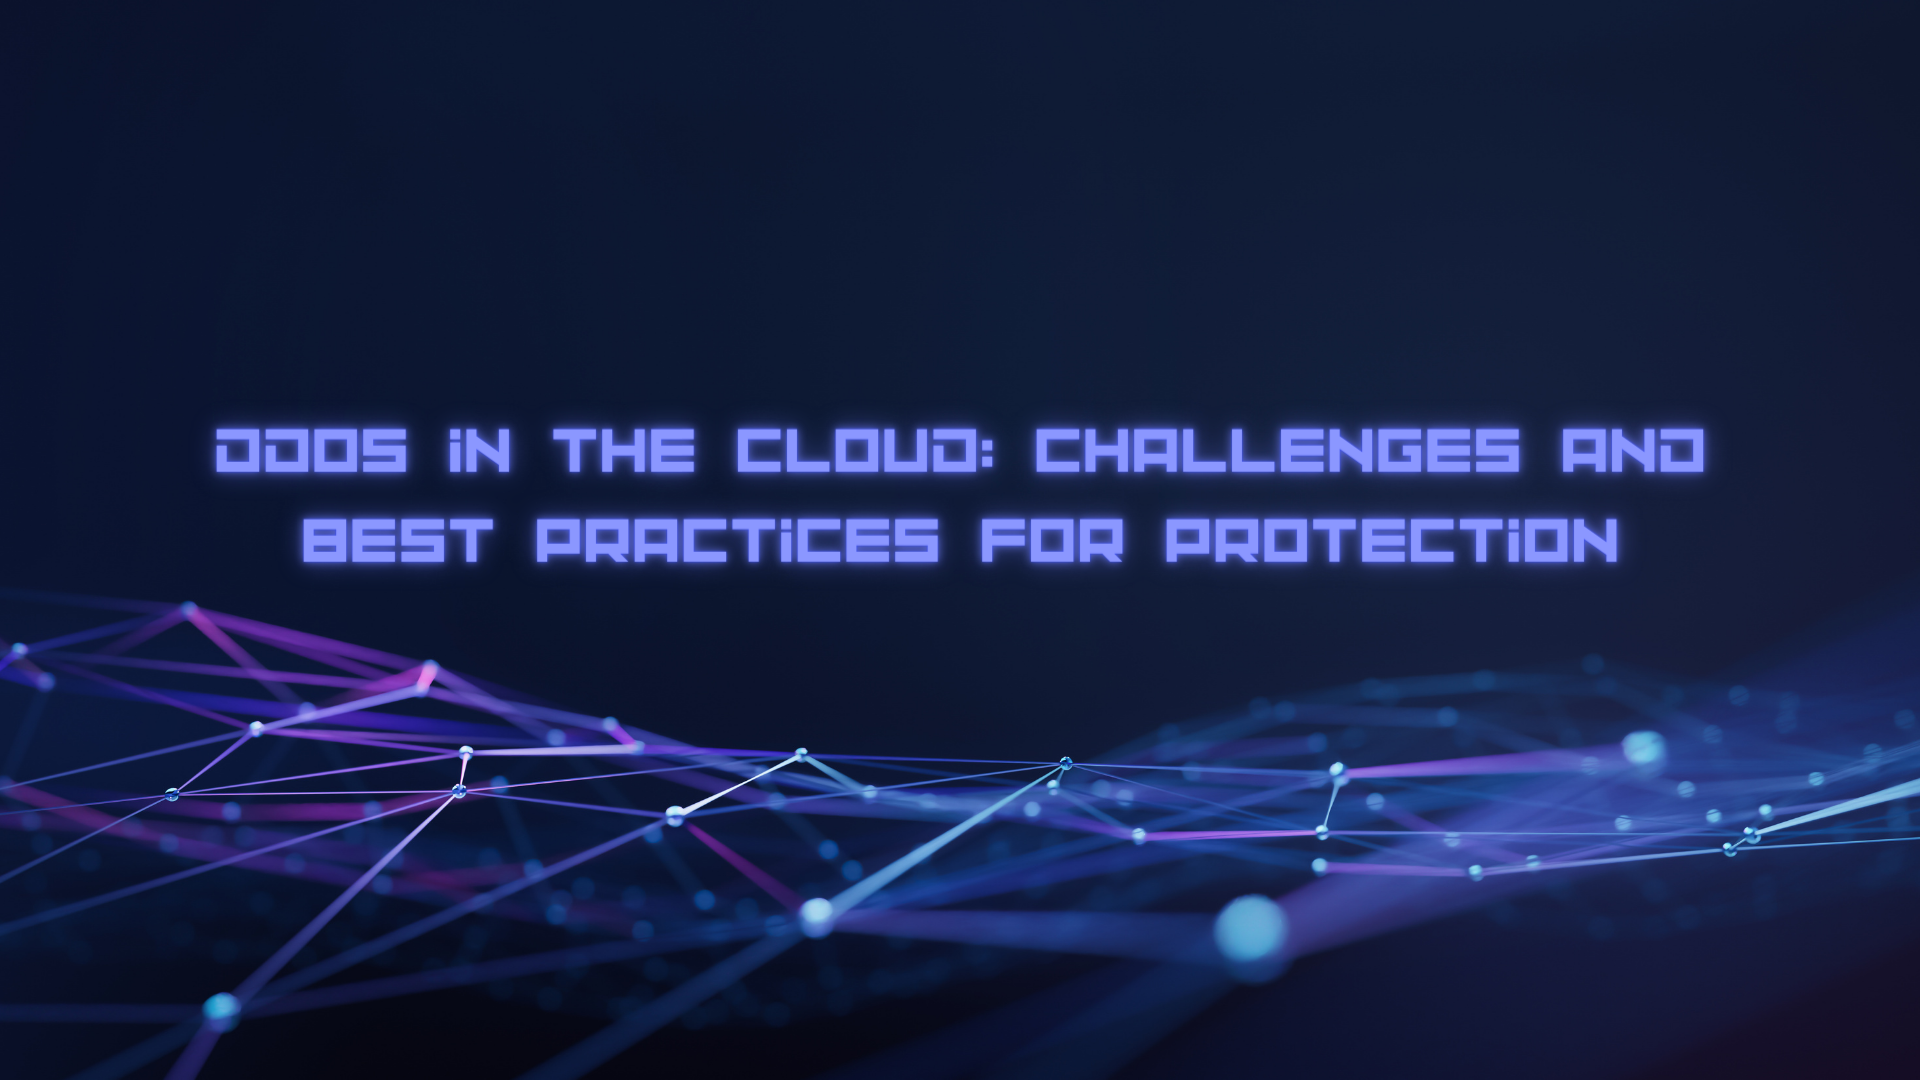 DDoS in the Cloud Challenges and Best Practices for Protection